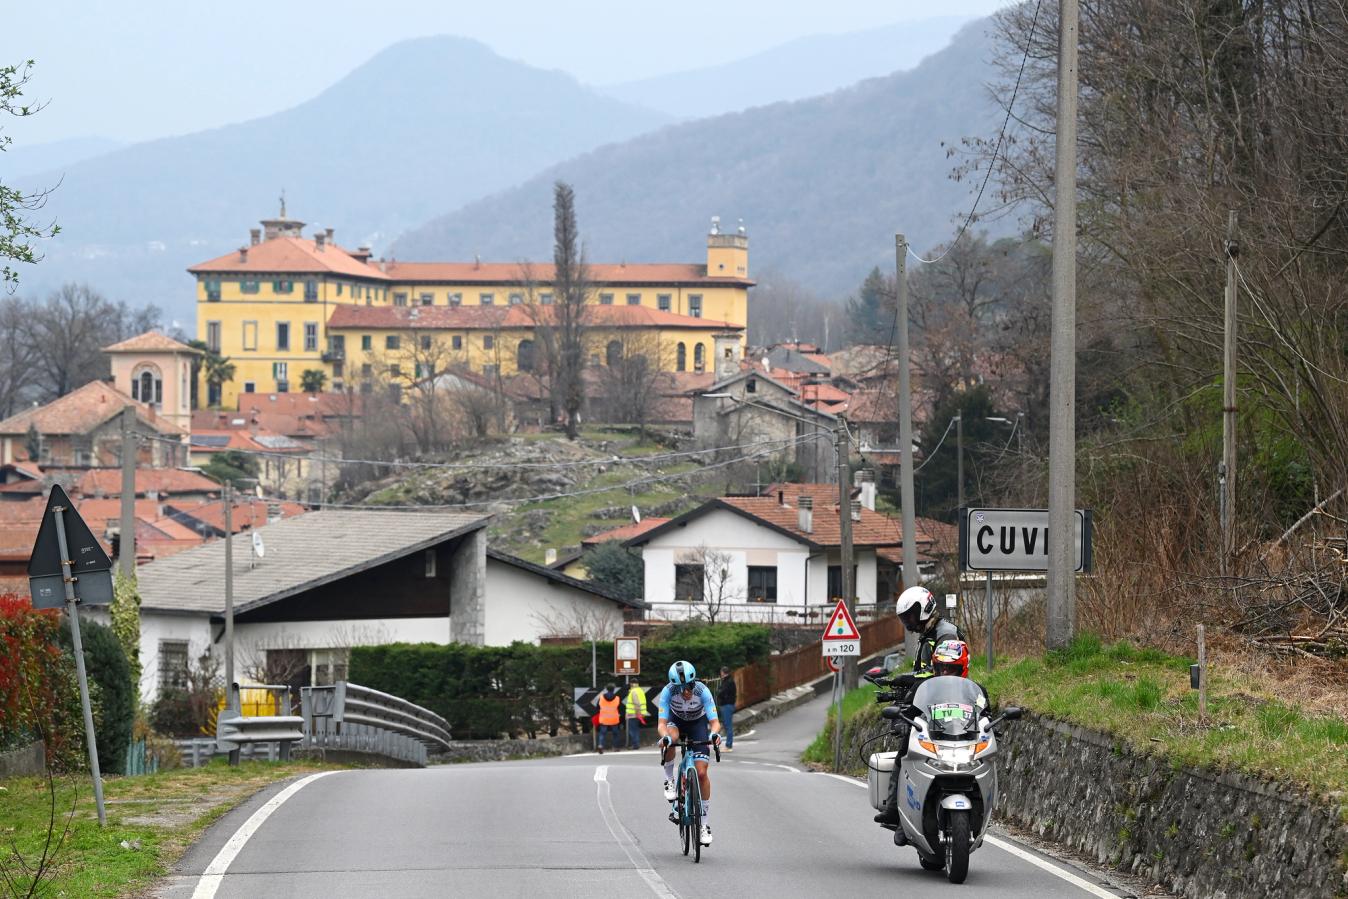 Trofeo Binda is set against the hills of Lombardy